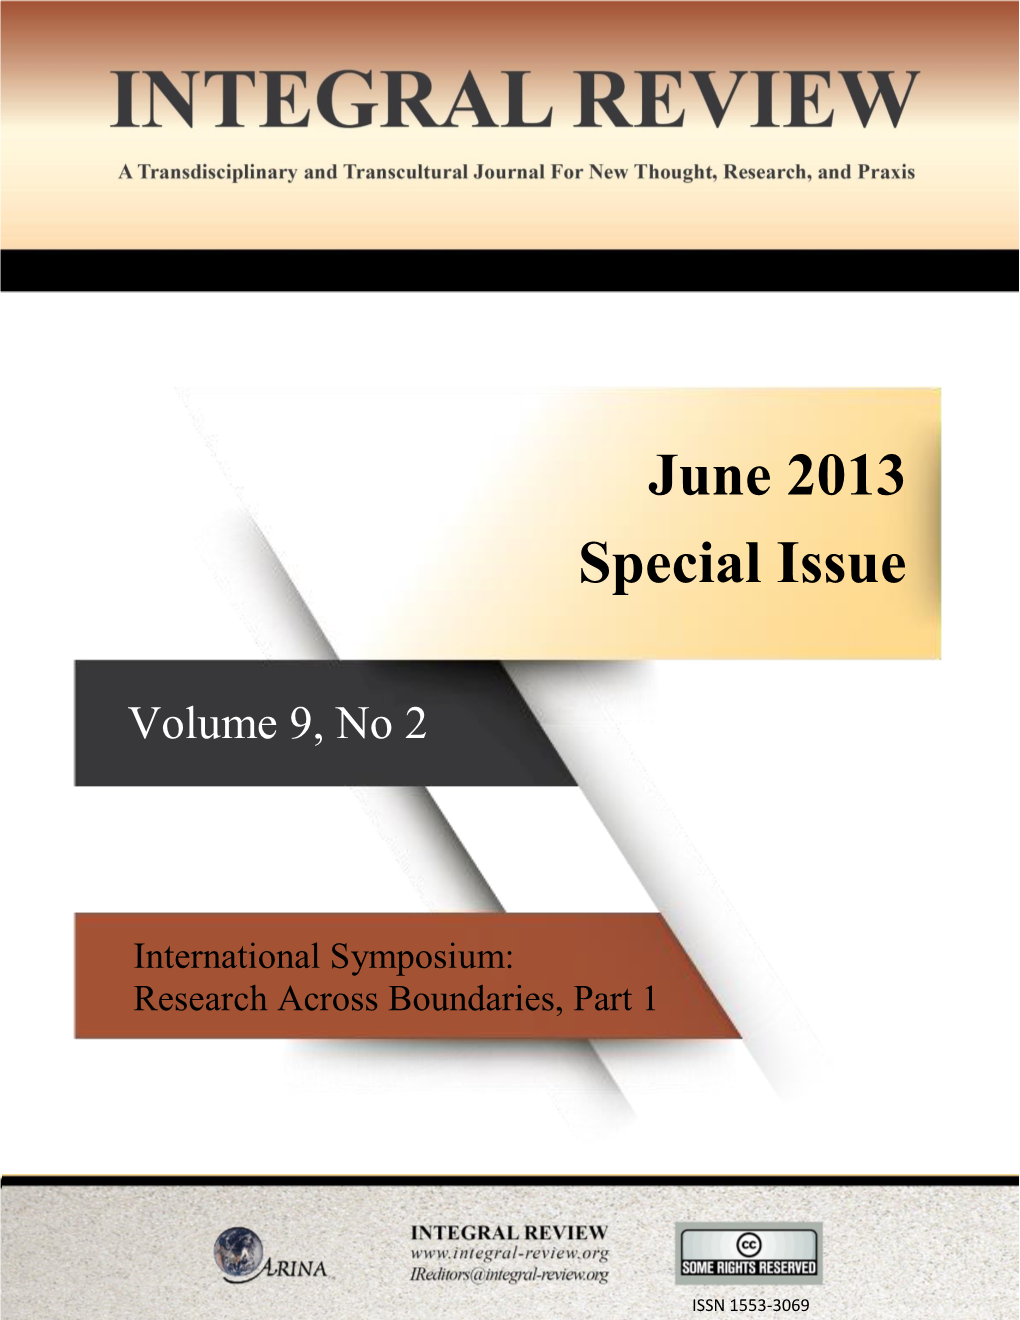 June 2013 Special Issue